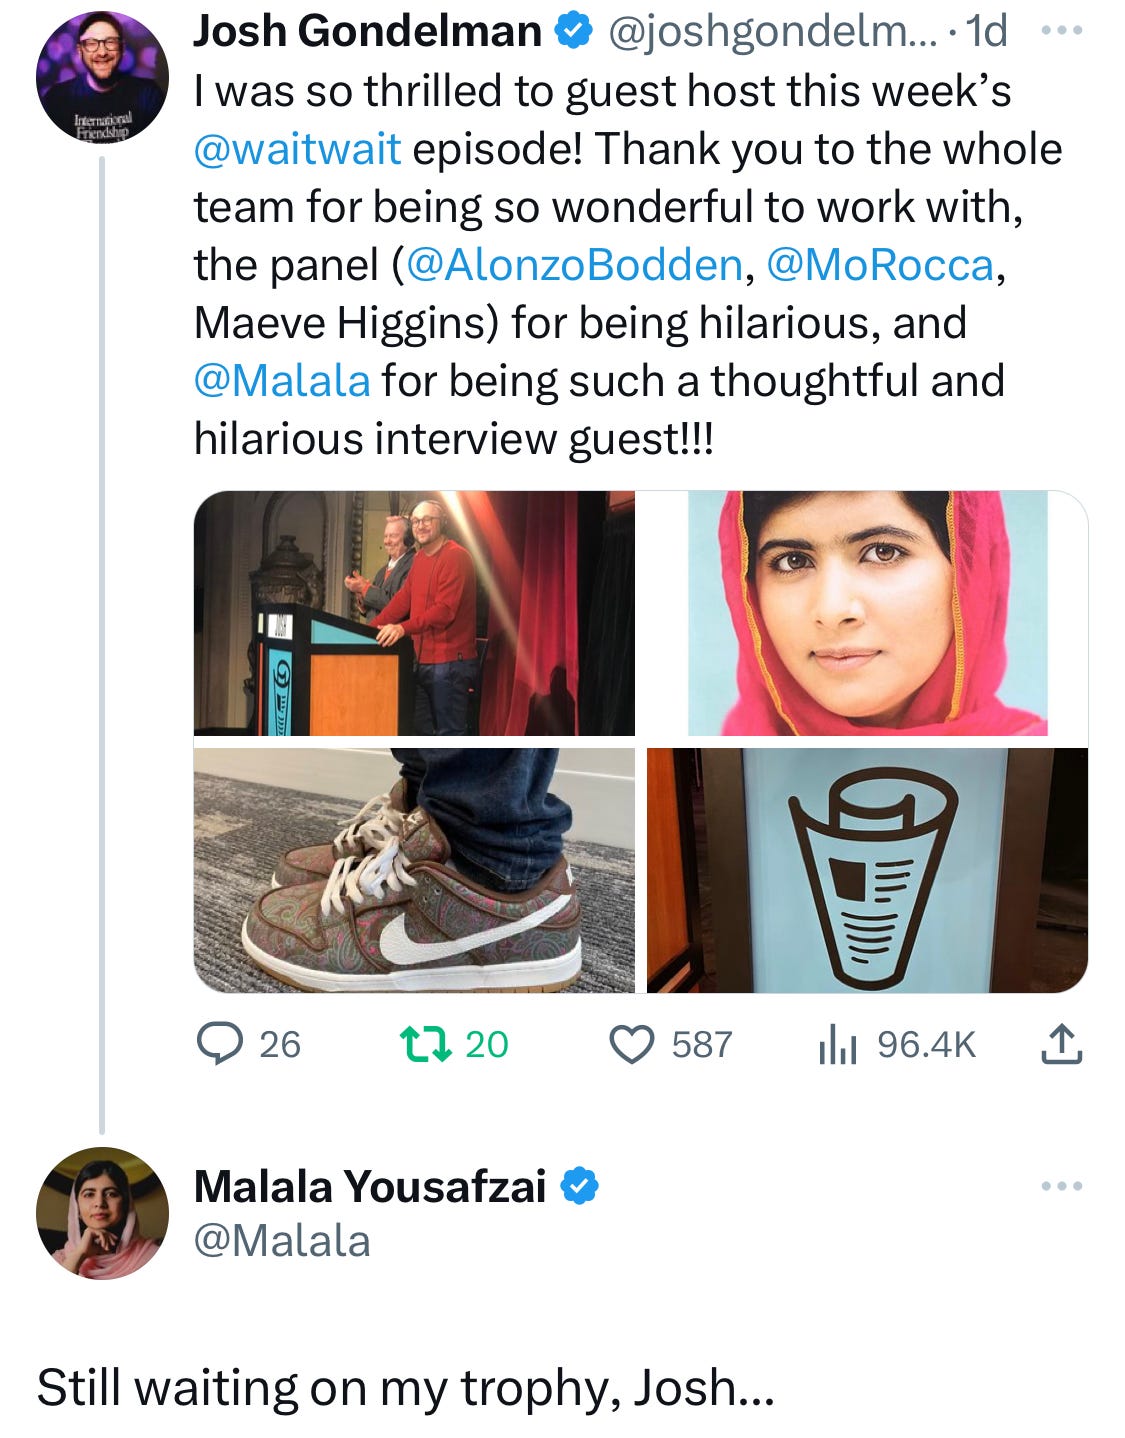 Malala asking me to send her a trophy on Twitter. Yes, for real.